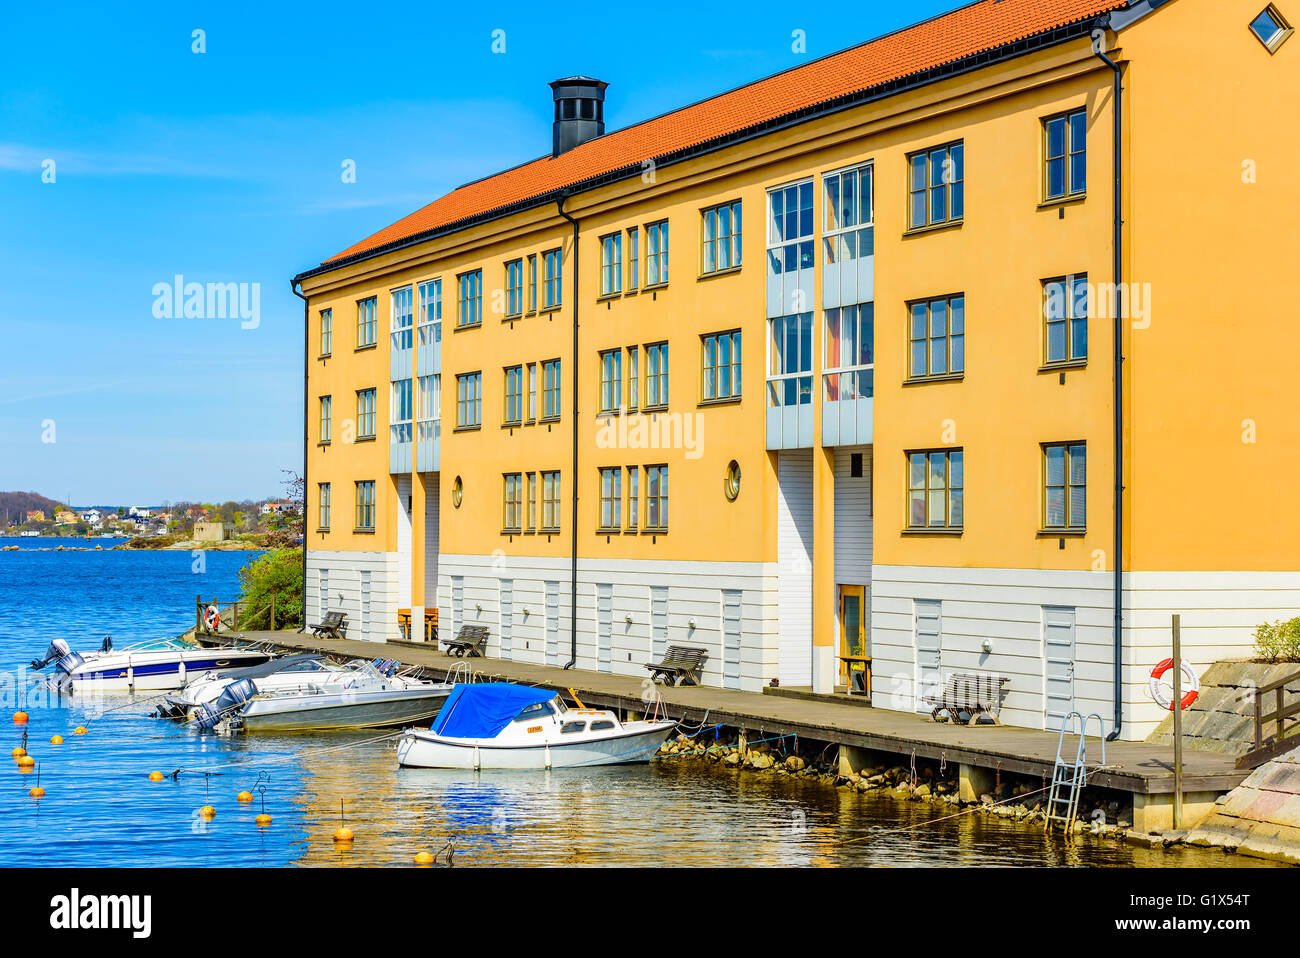 Karlskrona, Sweden - May 3, 2016: Coastal apartment building at Stumholmen in town. Building is yellow. Small recreational boats Stock Photo